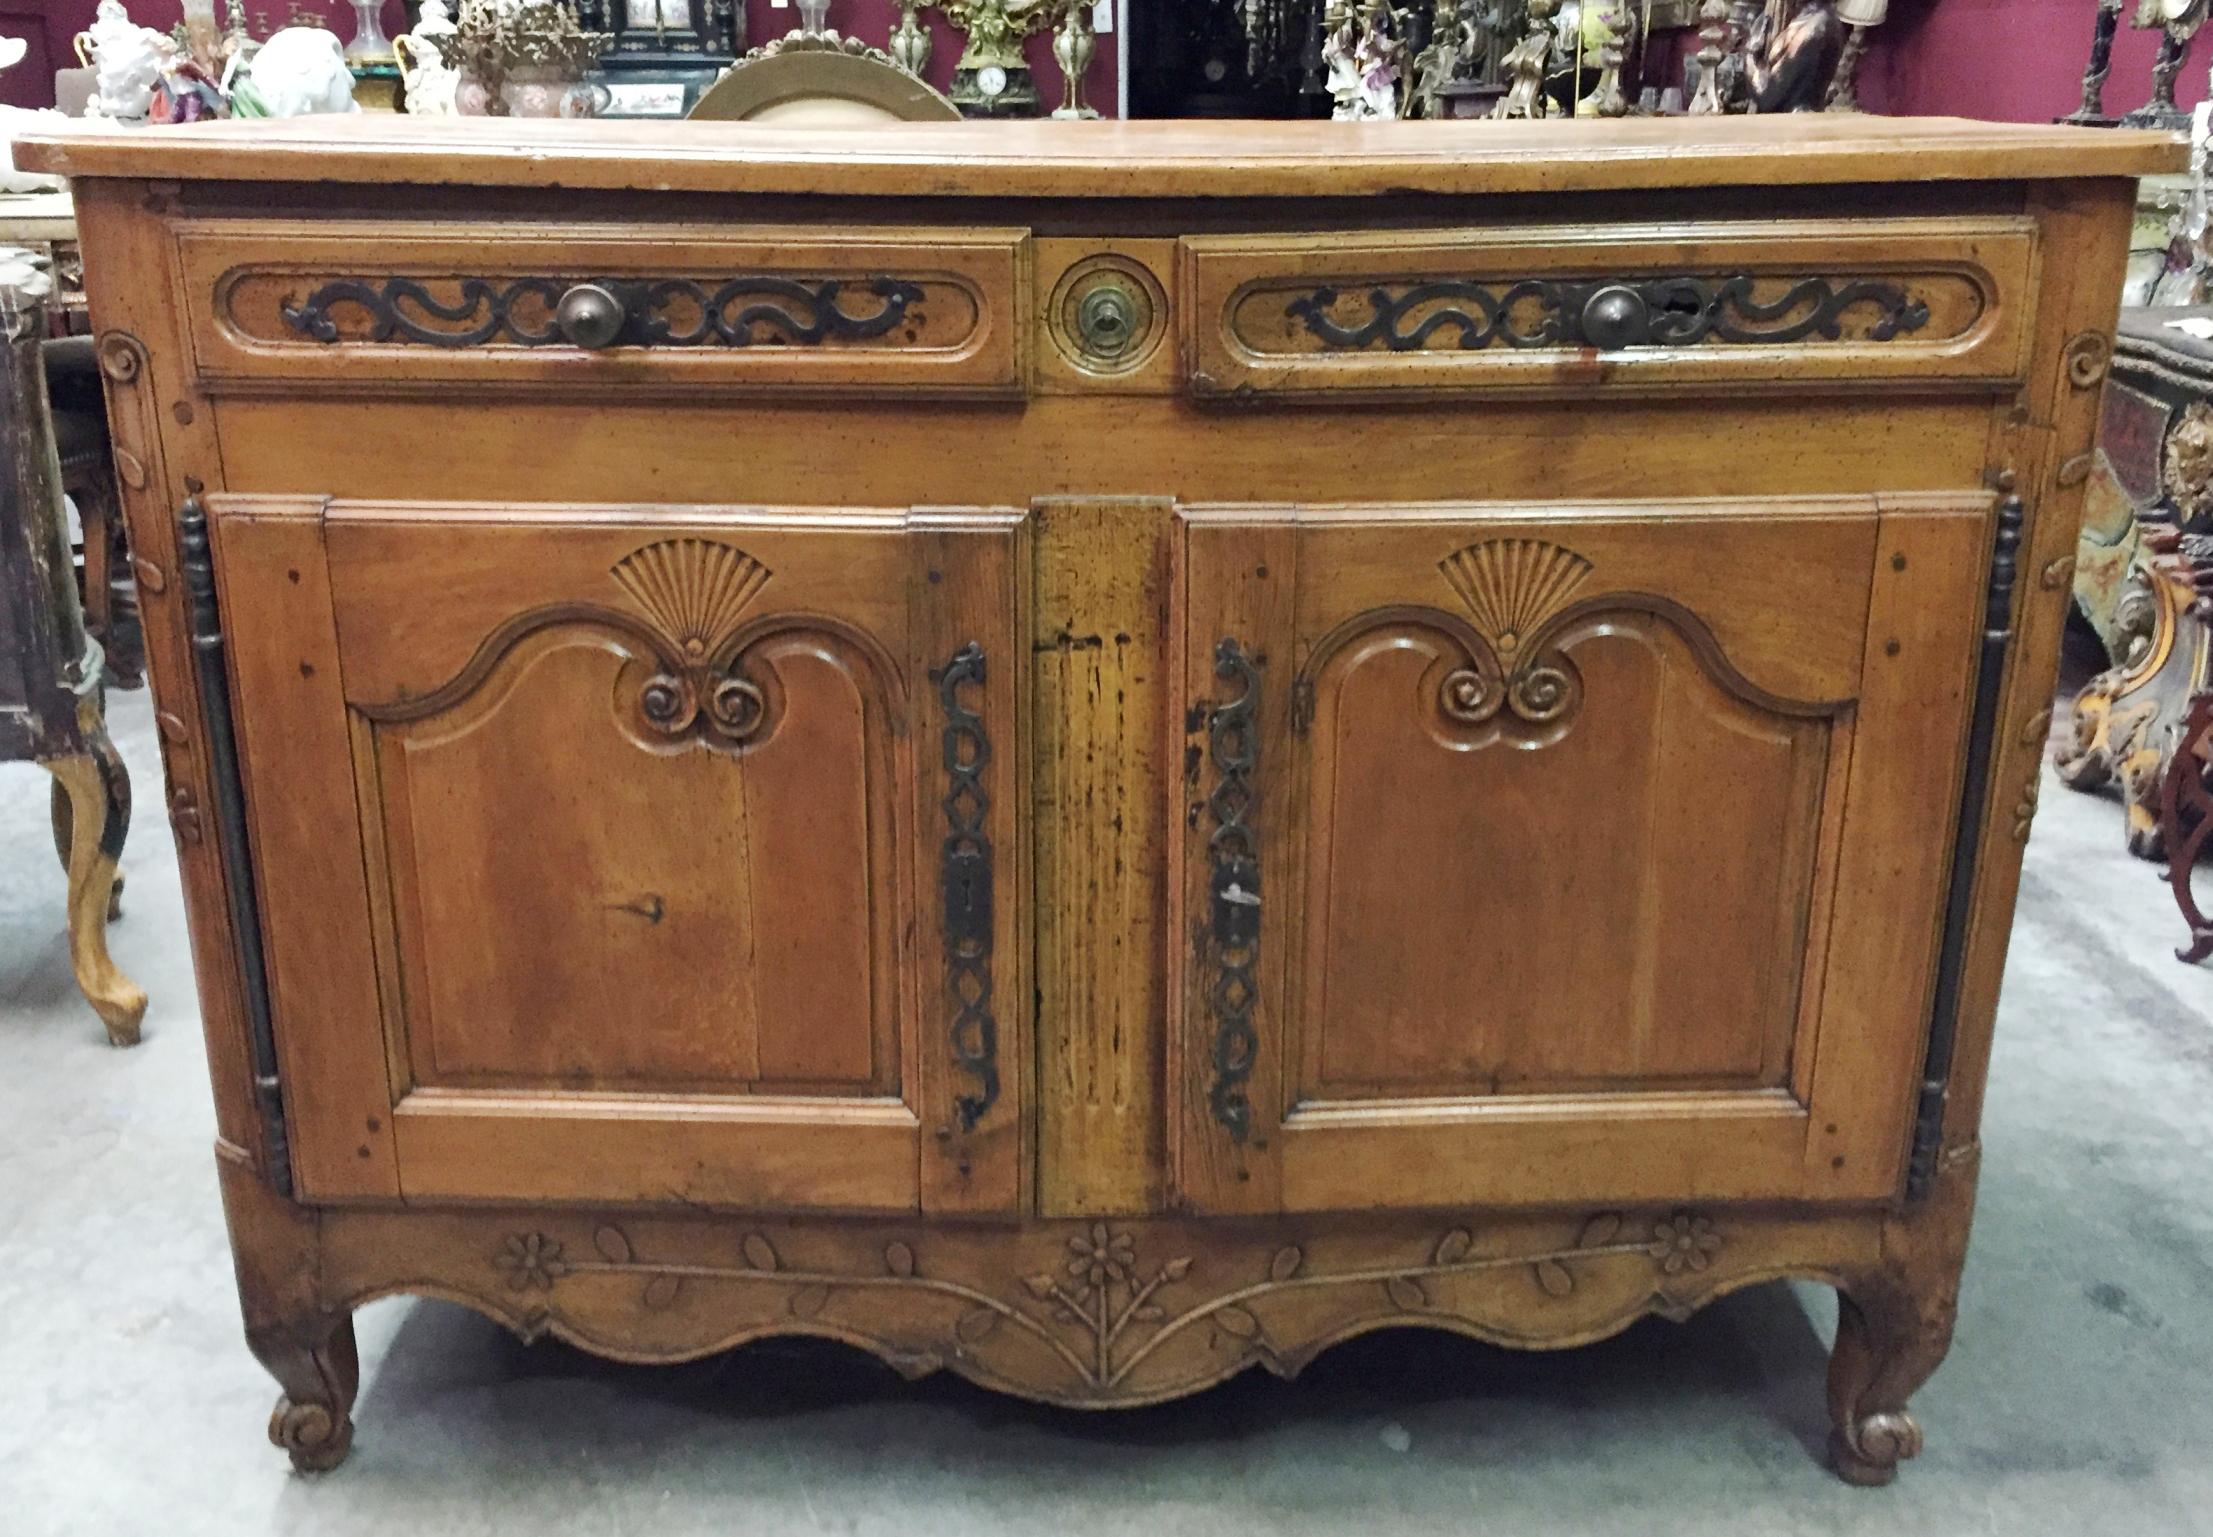 Beautiful 18th century French Provincial Louis XV carved walnut buffet. The moulded rectangular top over two mounted drawers and two hinged carved doors above a carved skirt with sunflower and foliage motif, supported by four cabriole legs.
The